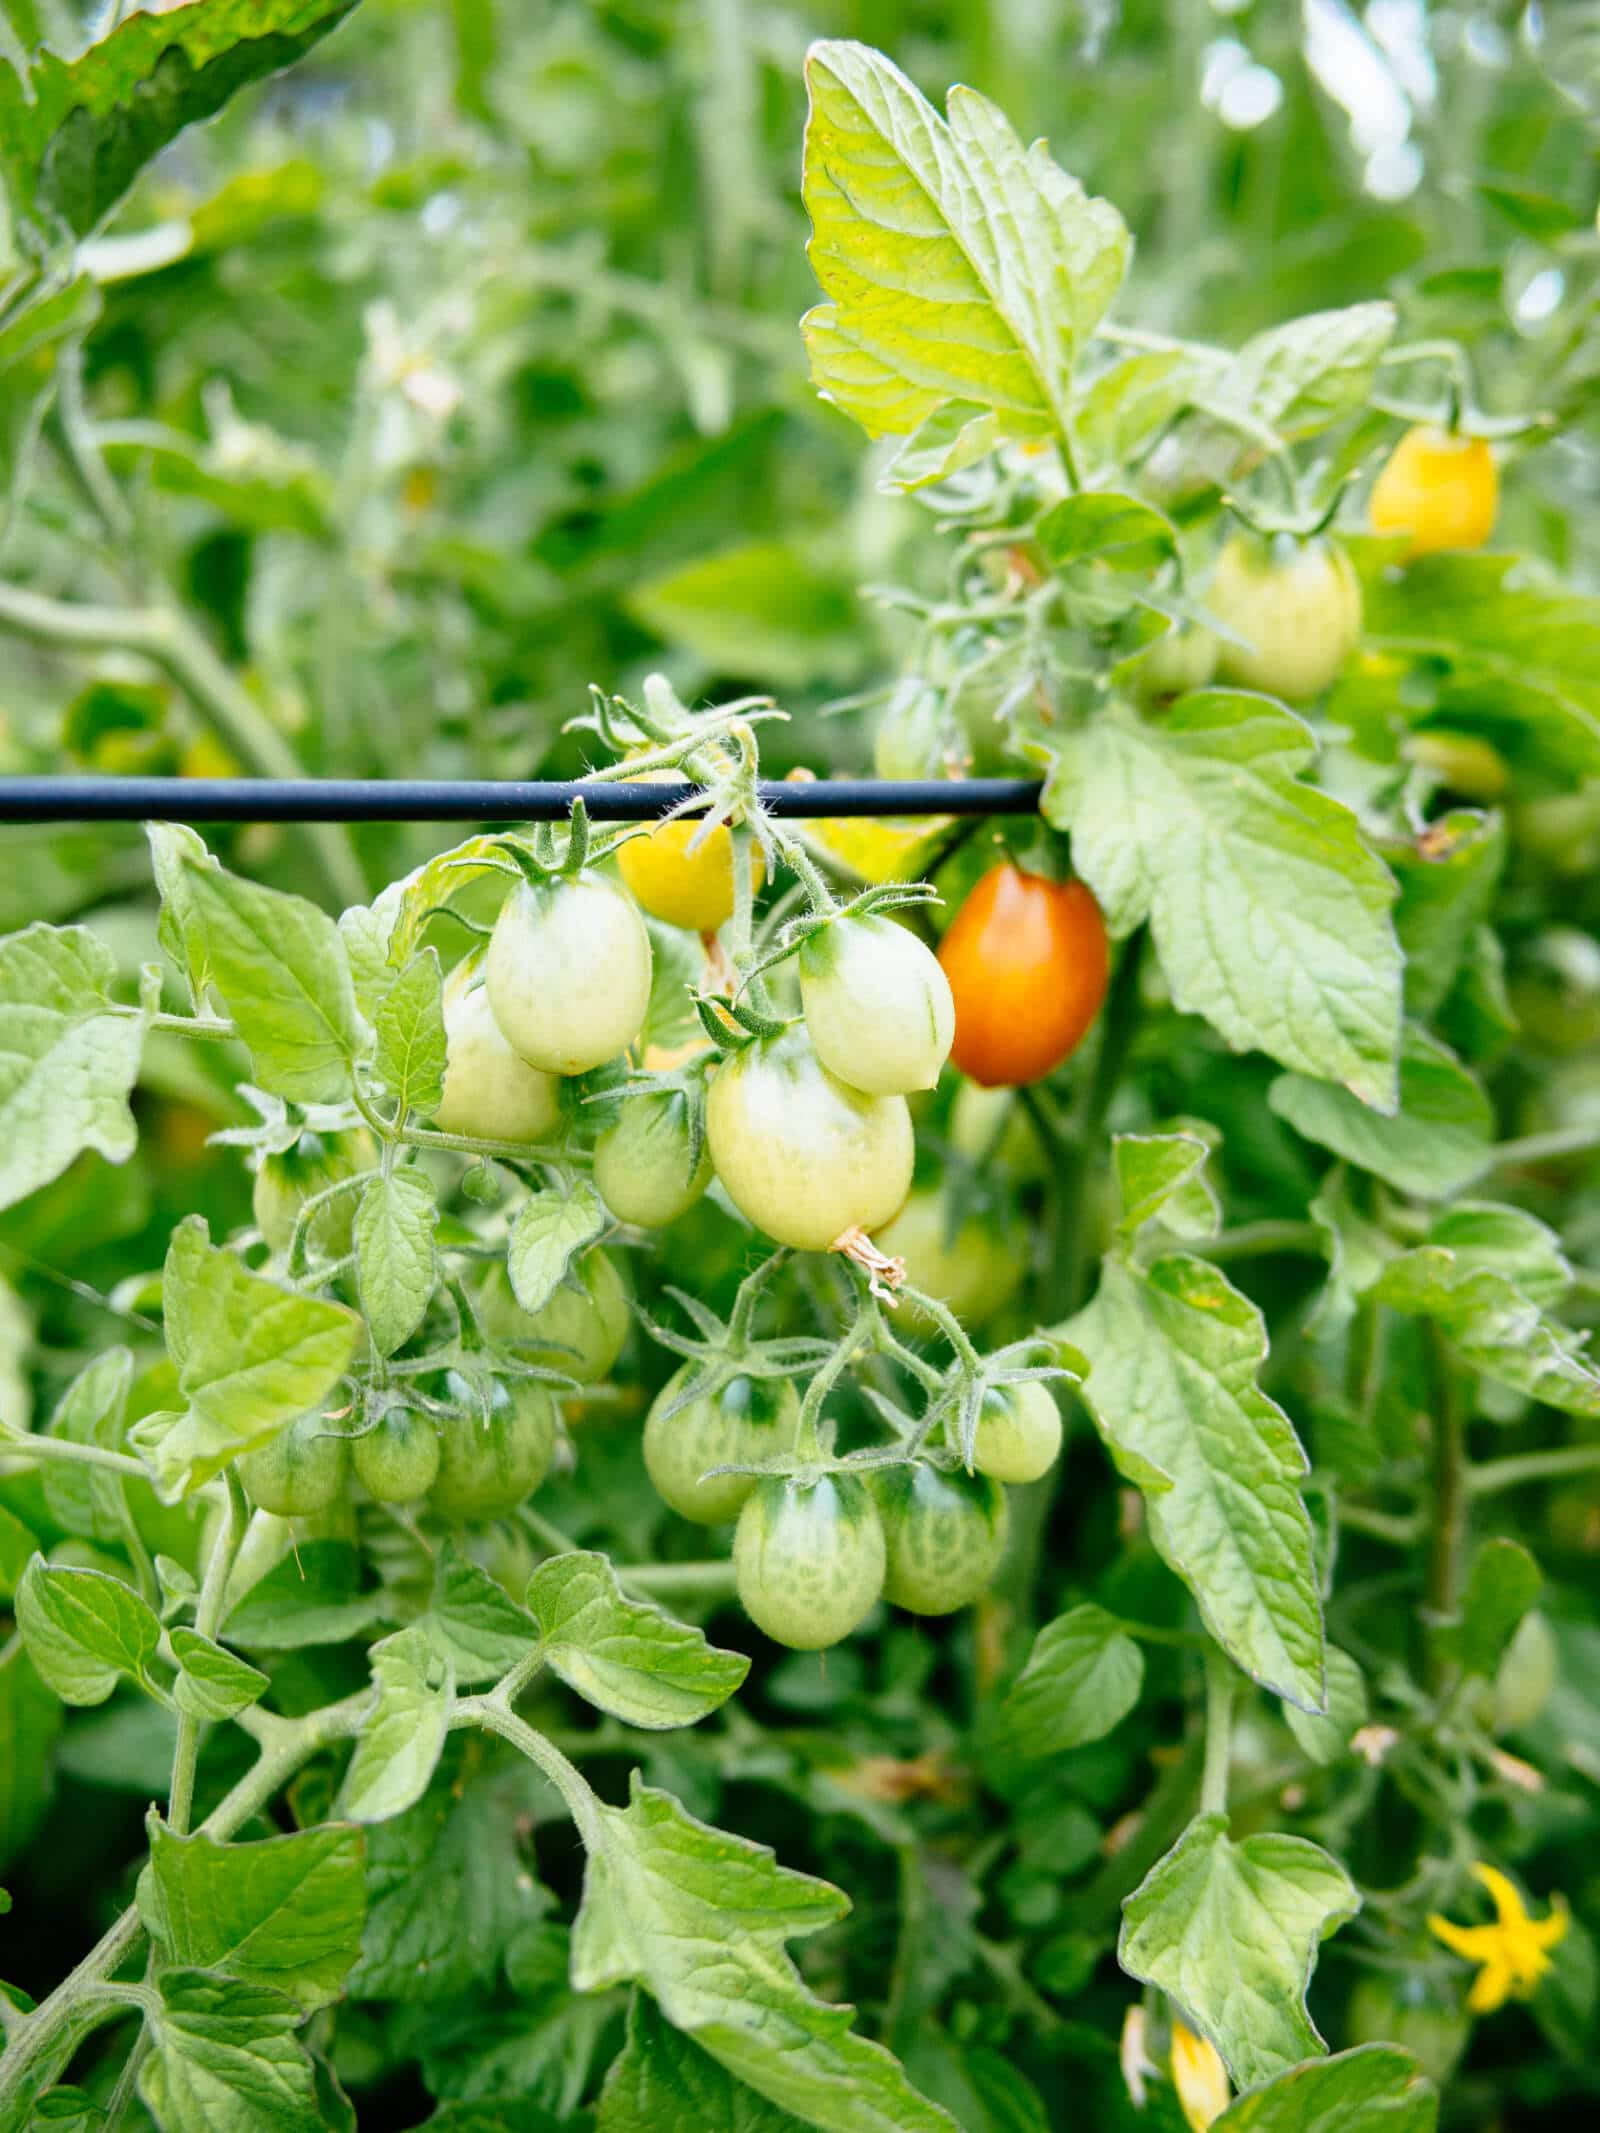 Tomato leaves are not toxic